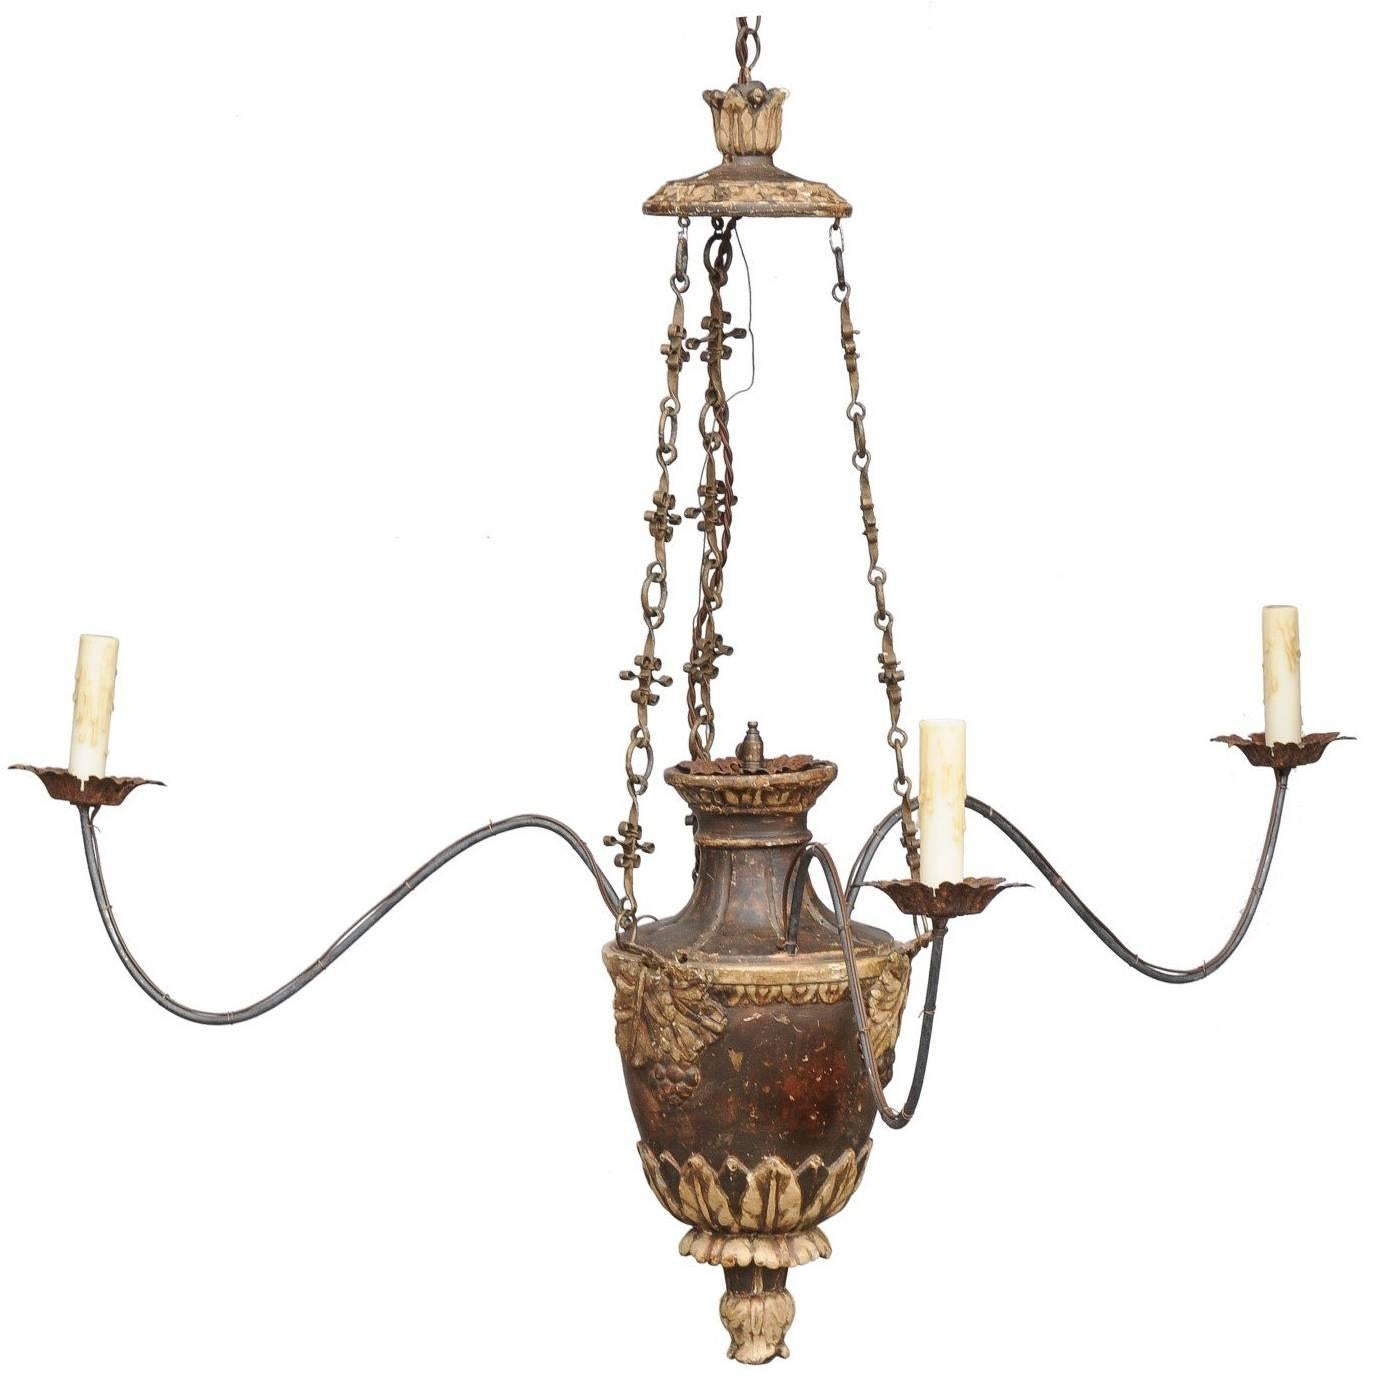 Italian Carved Wood Three-Light Chandelier with Swoop Arms, circa 1850